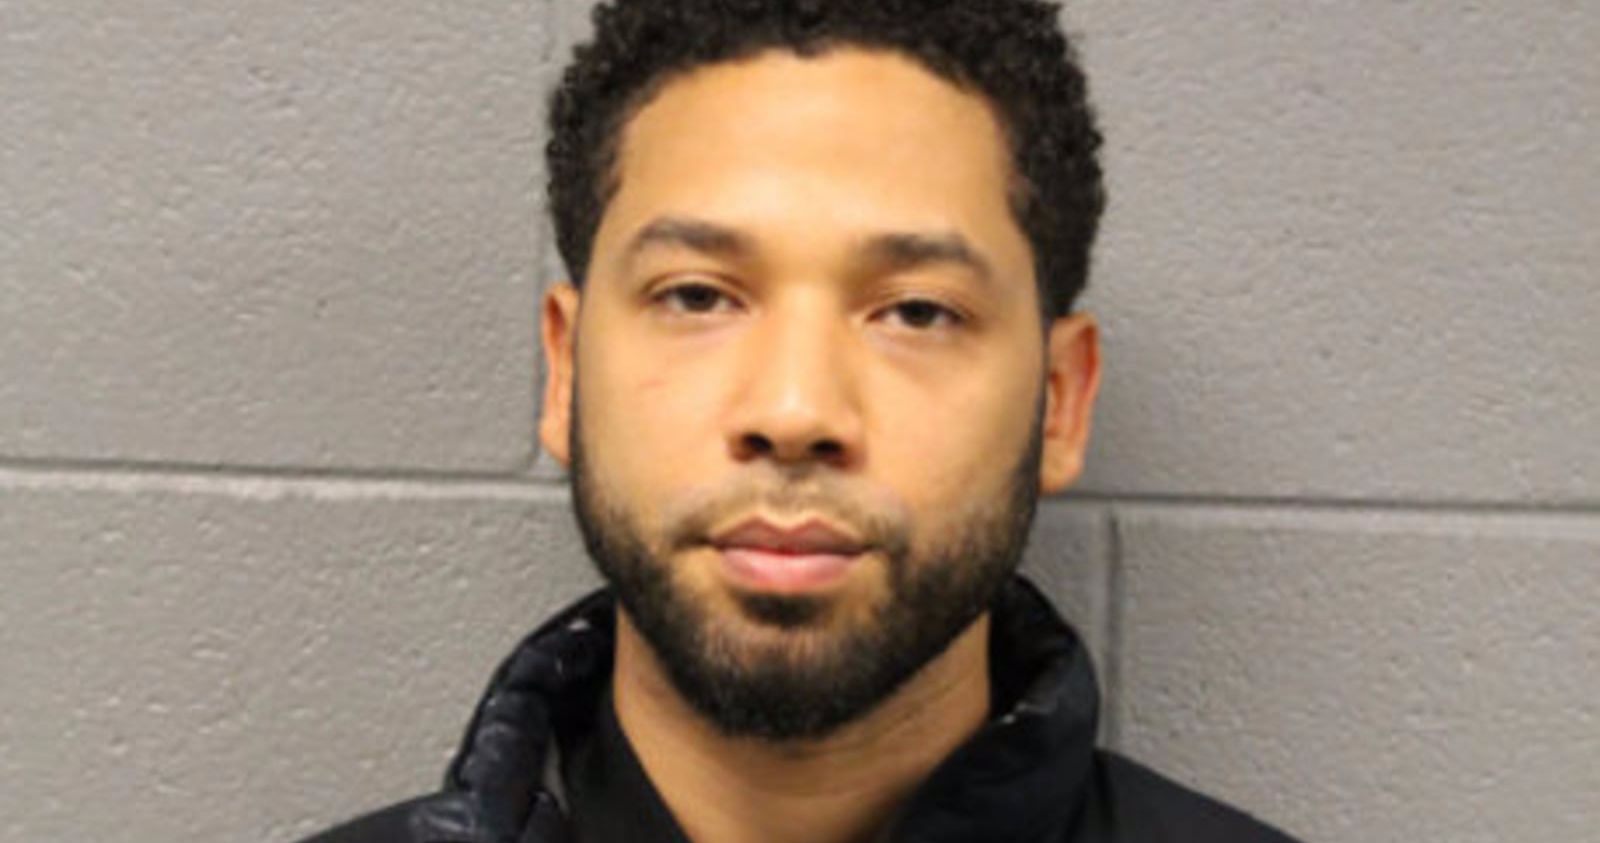 Jussie Smollett Slapped with New Criminal Charges for Alleged Fake Attack